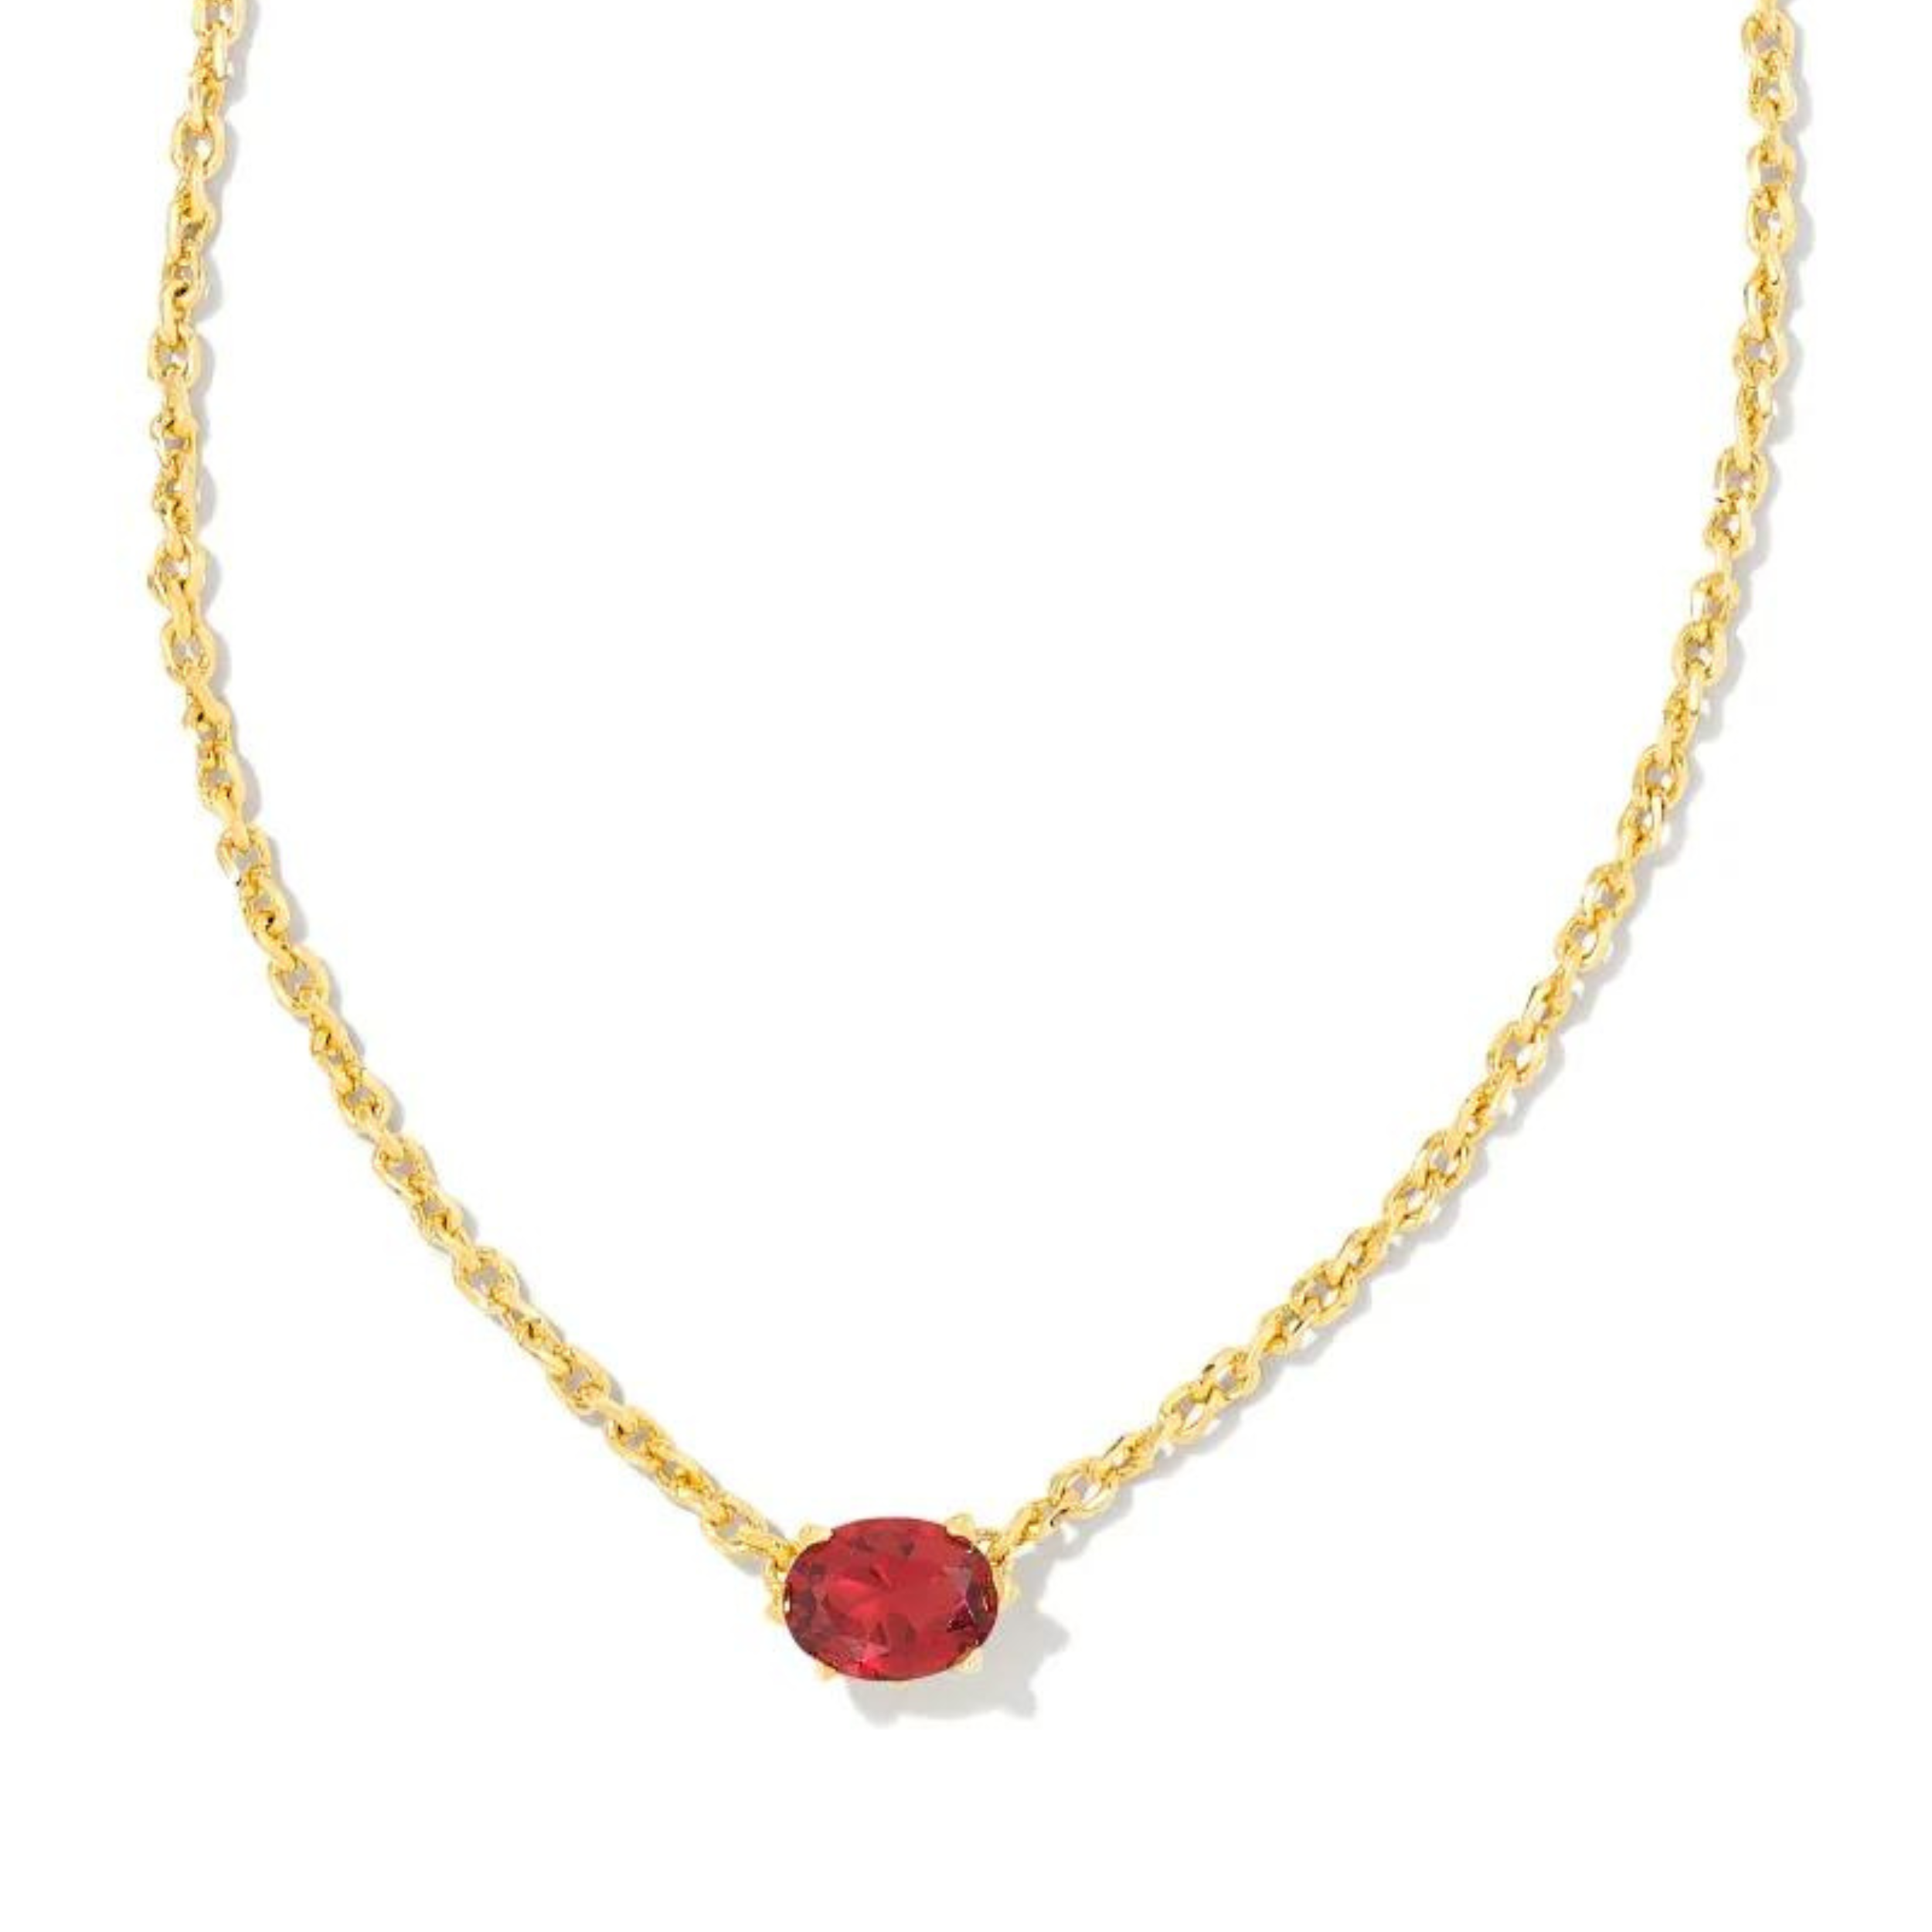 Gold chain necklace with a burgandy crystal pendatn, pictured on a white background.